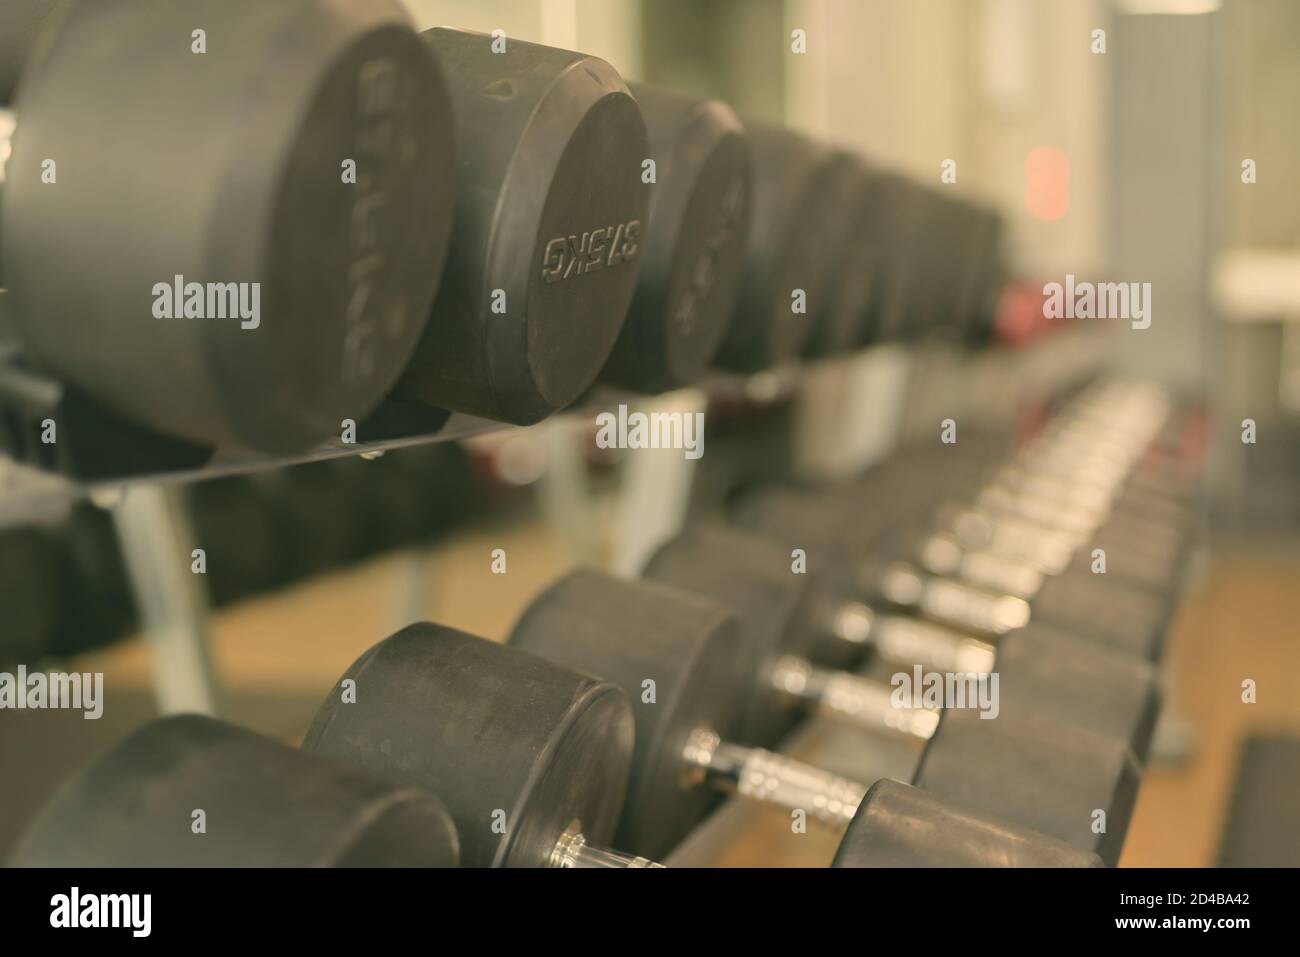 Portrait of Dumbbells Aligned At The Gym Stock Photo